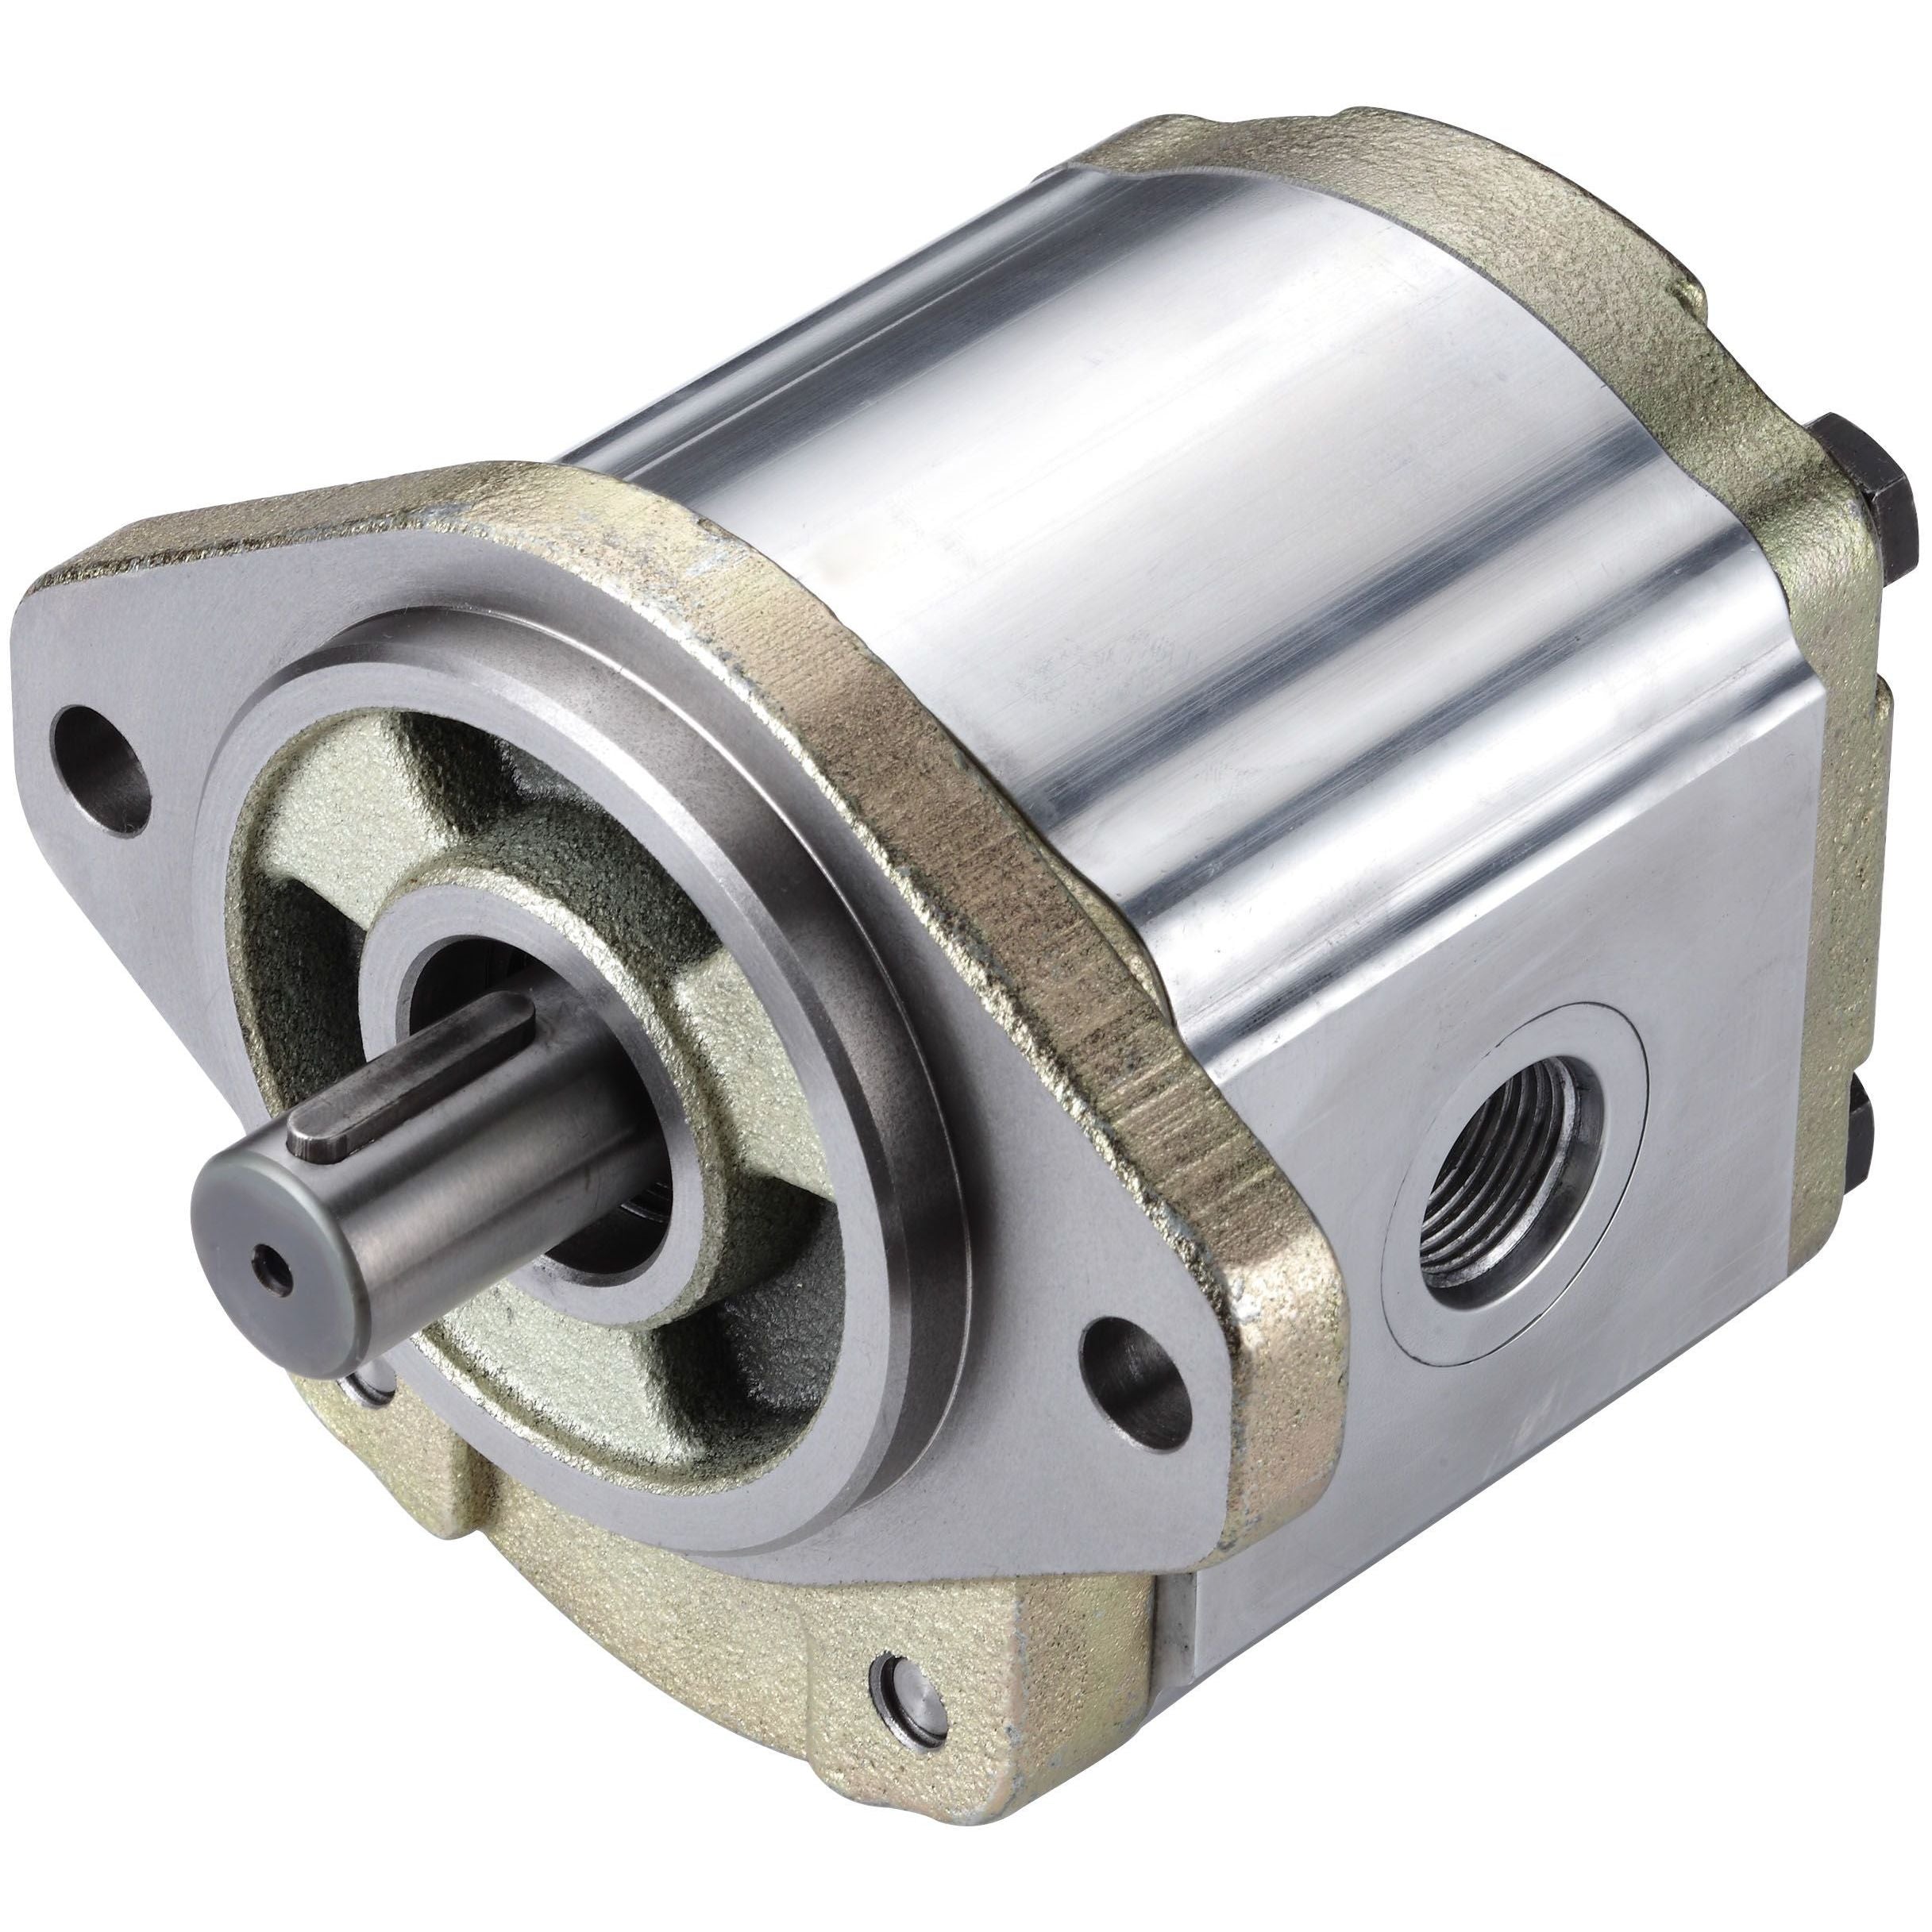 3GB8ZU125R : Honor Gear Pump, CW Rotation, 25cc (1.53in3), 11.89 GPM, 3500psi, 3000 RPM, #16 SAE (1") In, #12 SAE (3/4") Out, Splined Shaft 13-Tooth, 16/32 Pitch, SAE B 2-Bolt Mount